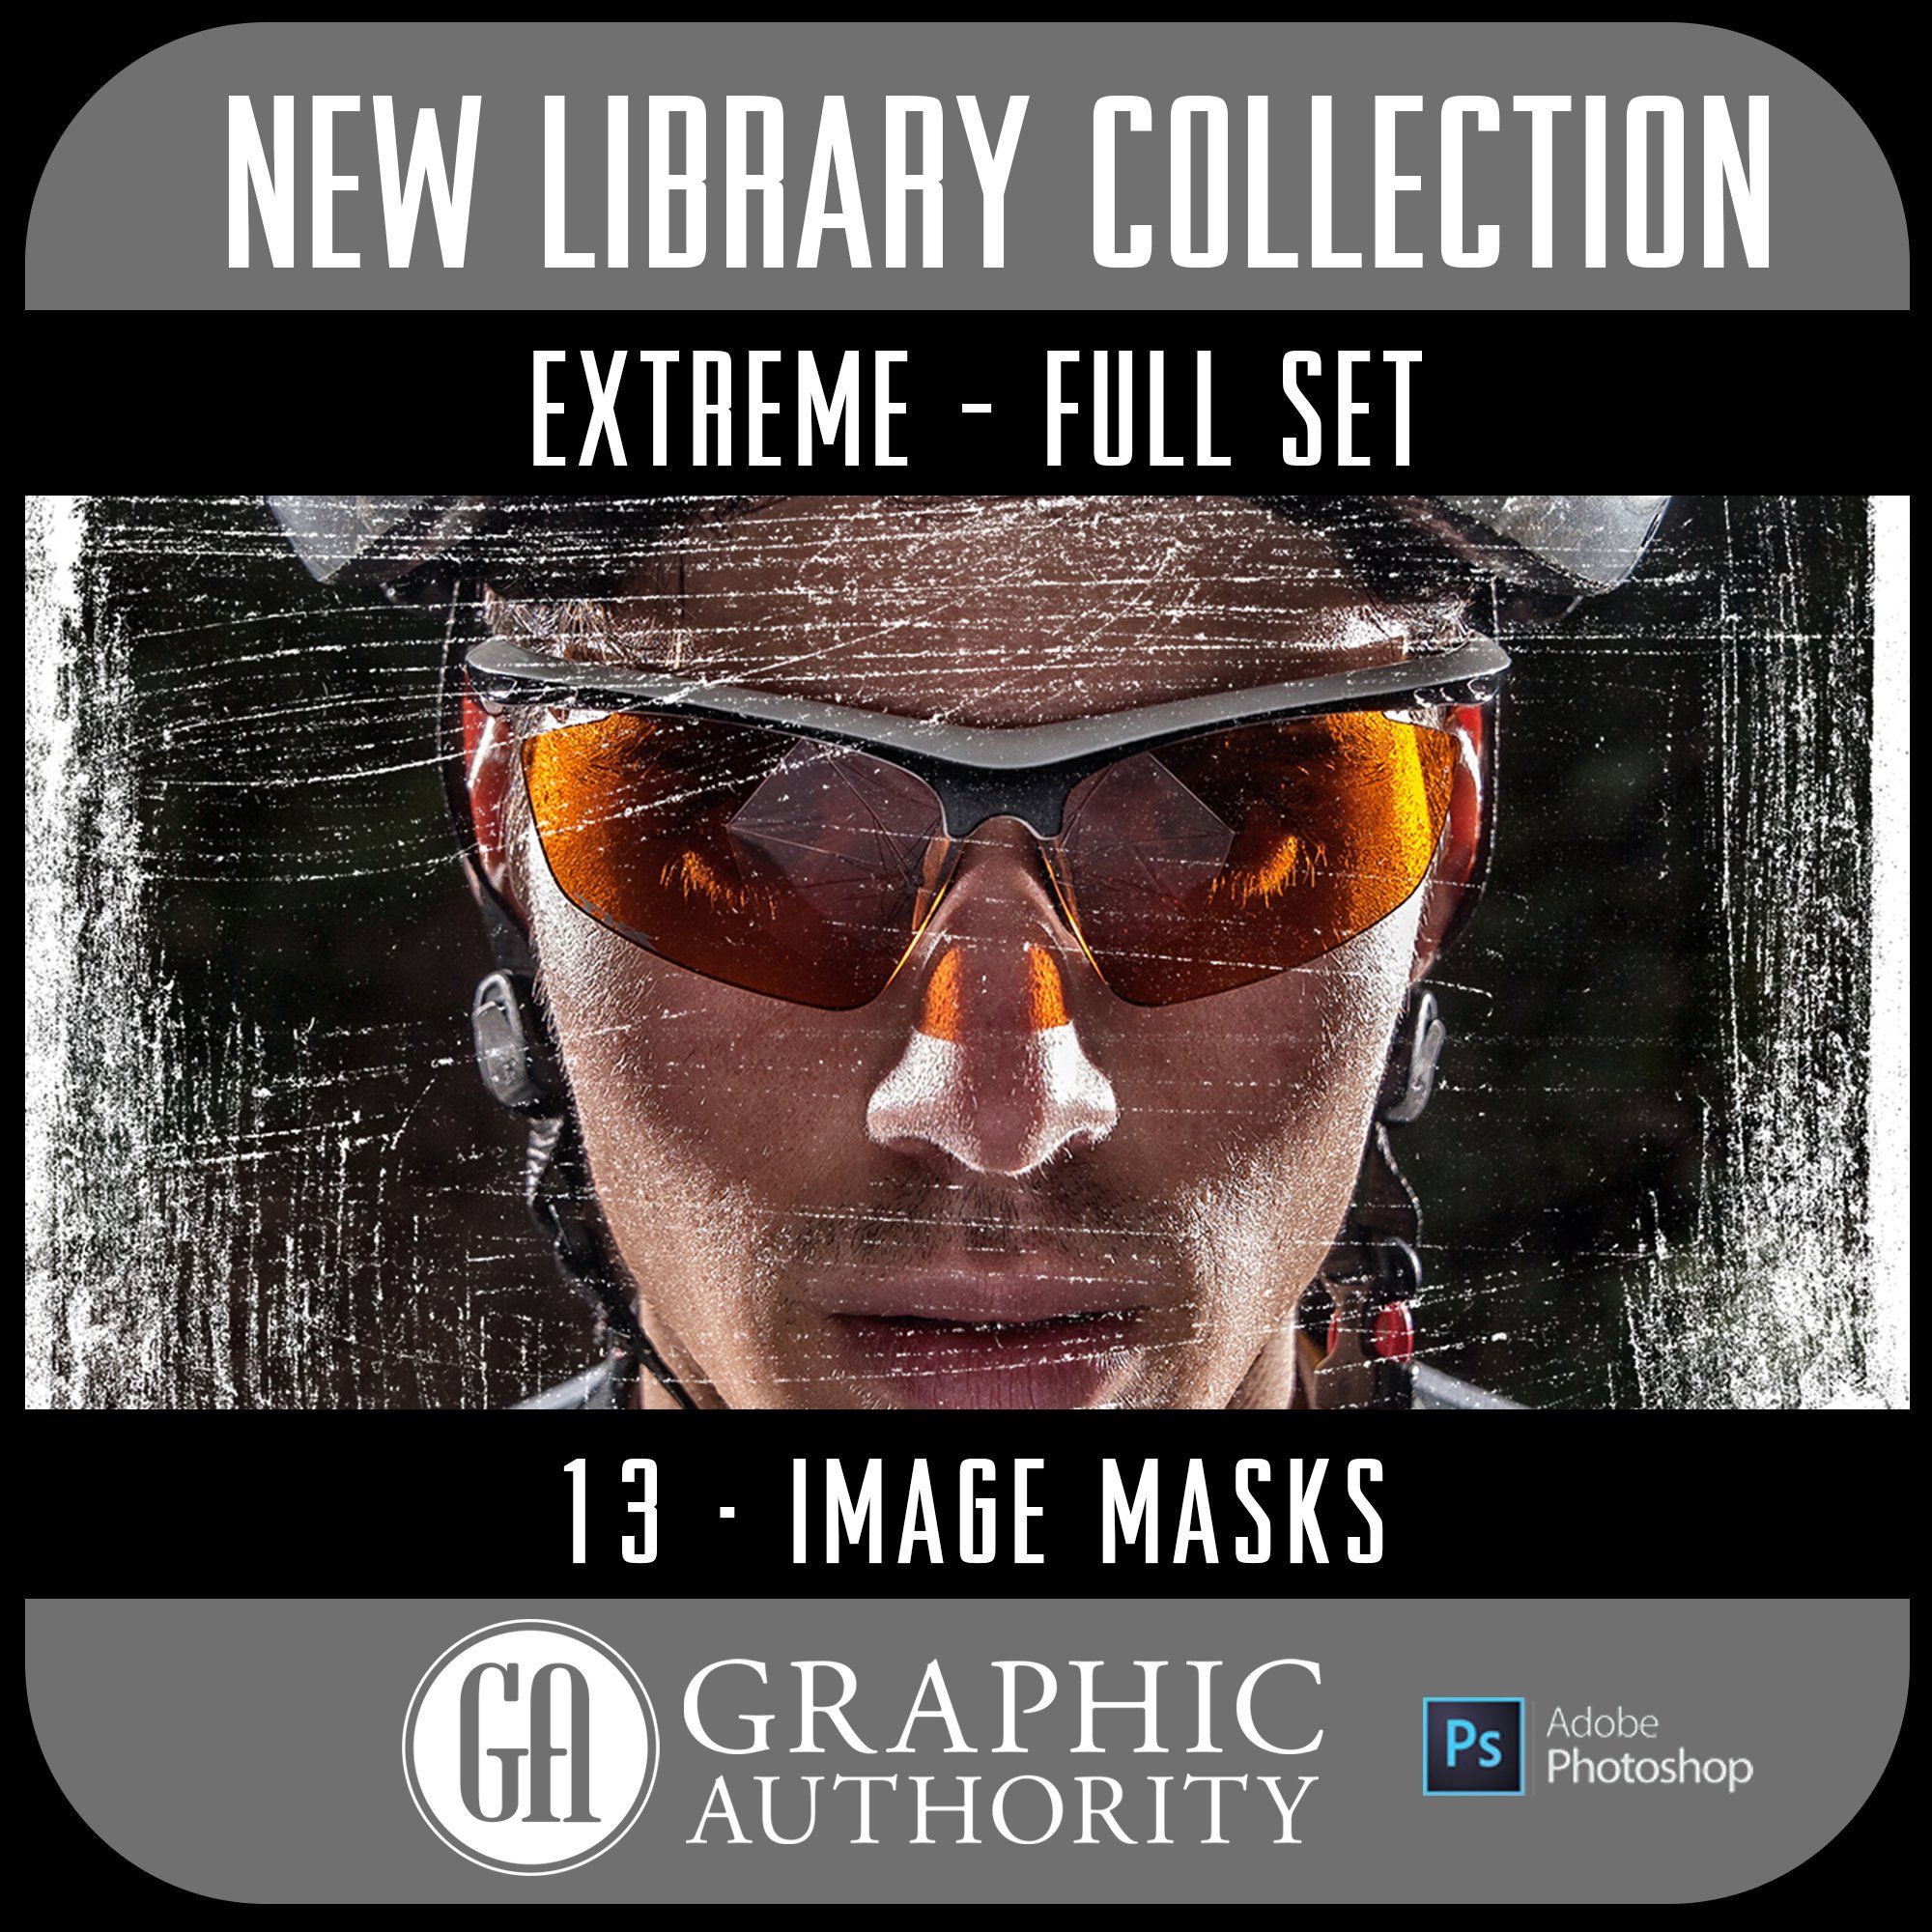 New Library - Extreme Masks - Full Collection-Photoshop Template - Graphic Authority